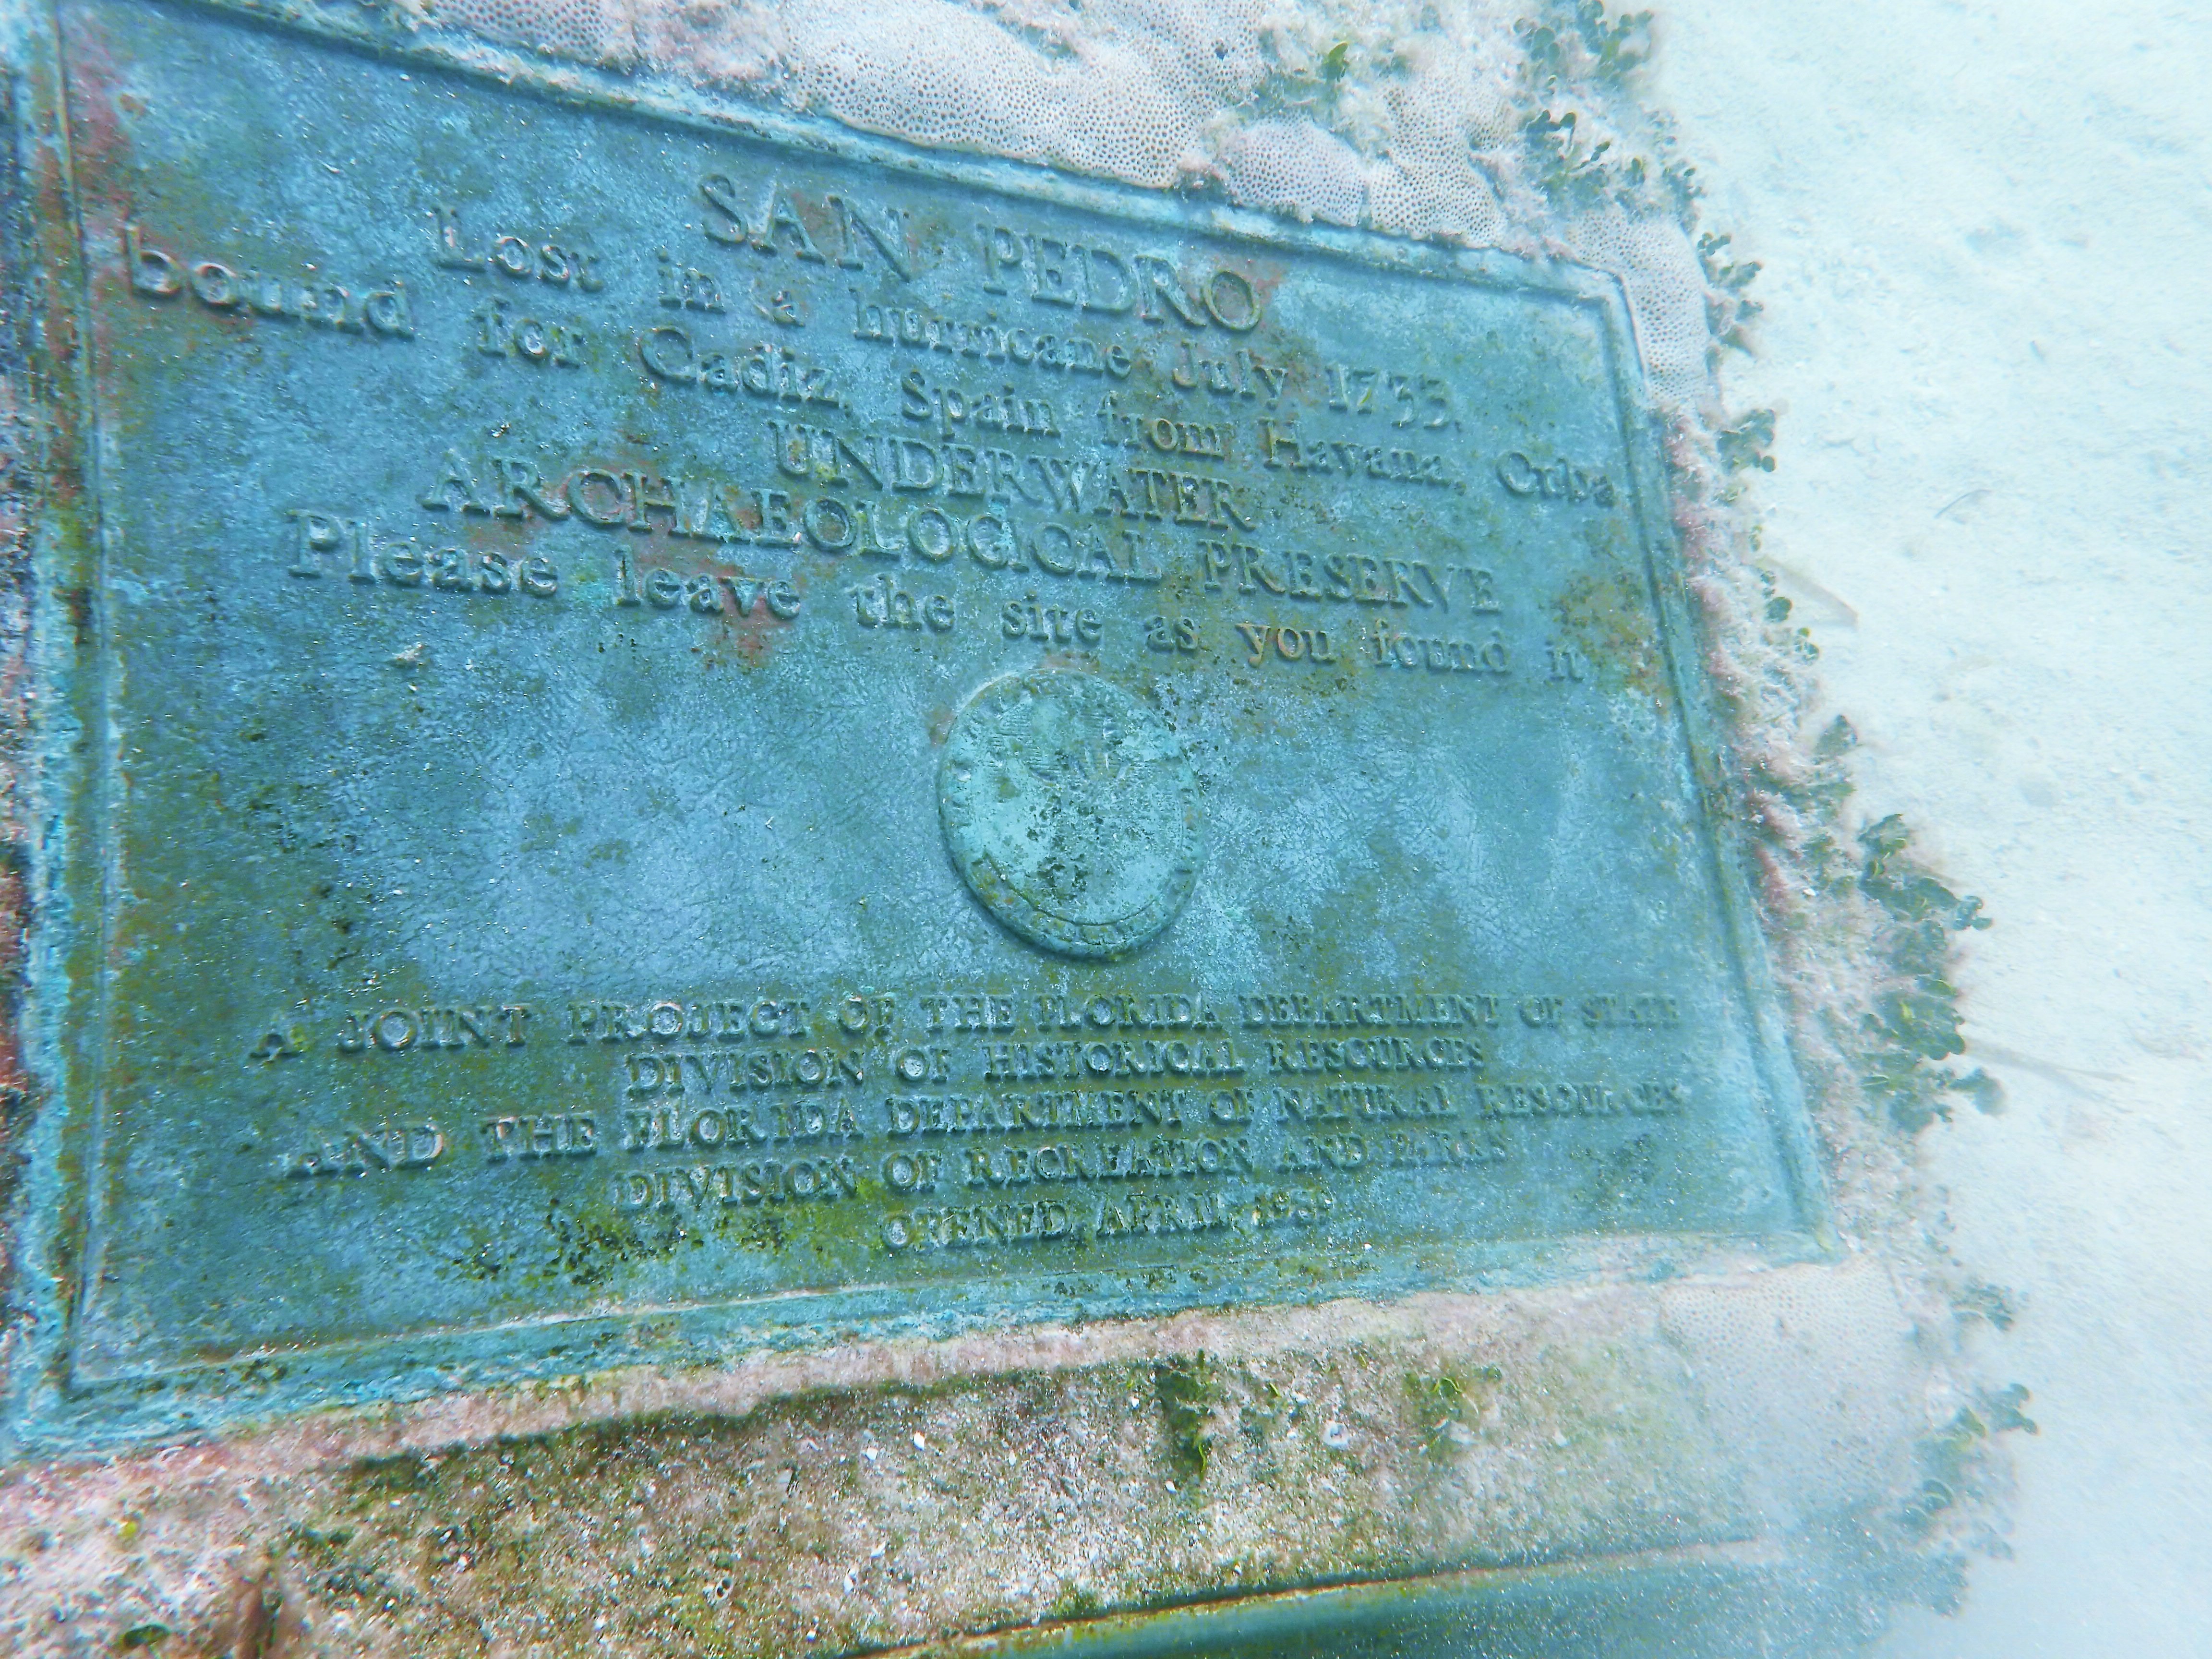 close up of the site marker for the San Pedro